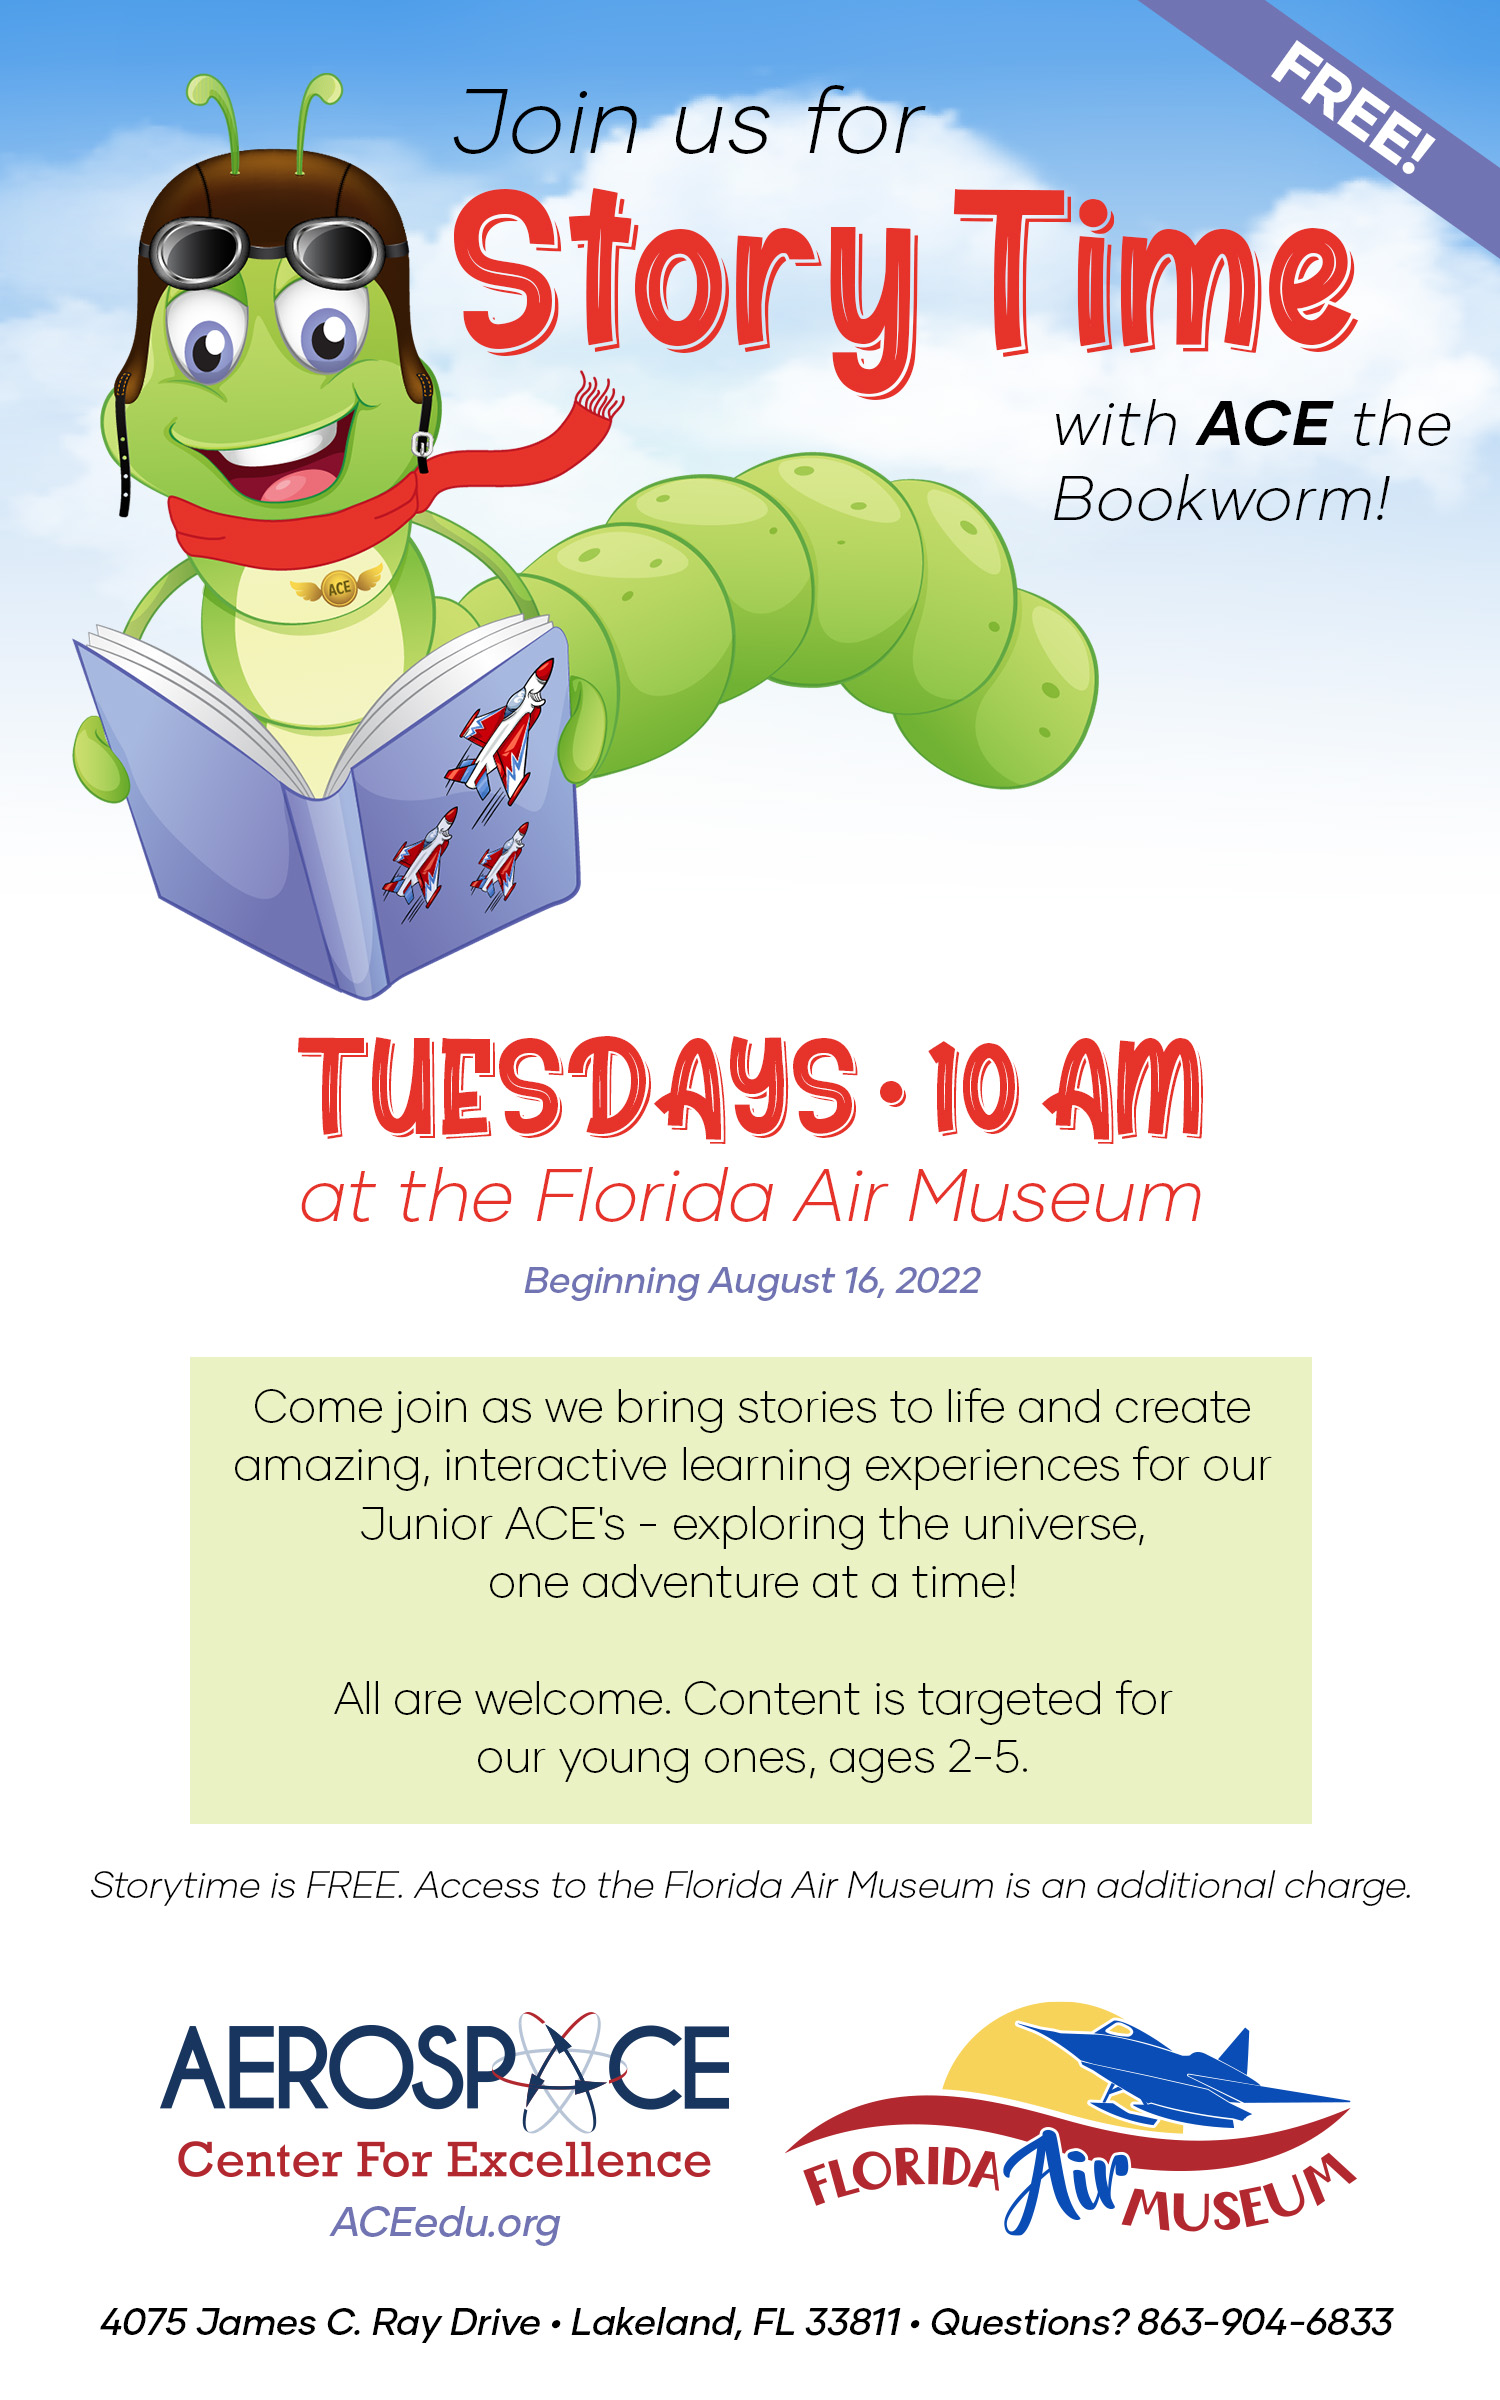 join us for storytime with ace the book worm.  free!  tuesdays at 10am at the florida air musuem, beginning 8-122.  all welcome, content is targeted for 2-5 year olds.  story time is free, access to museum is an additional charge.  4075 james c ray dr, lakeland.  863-904-6833.